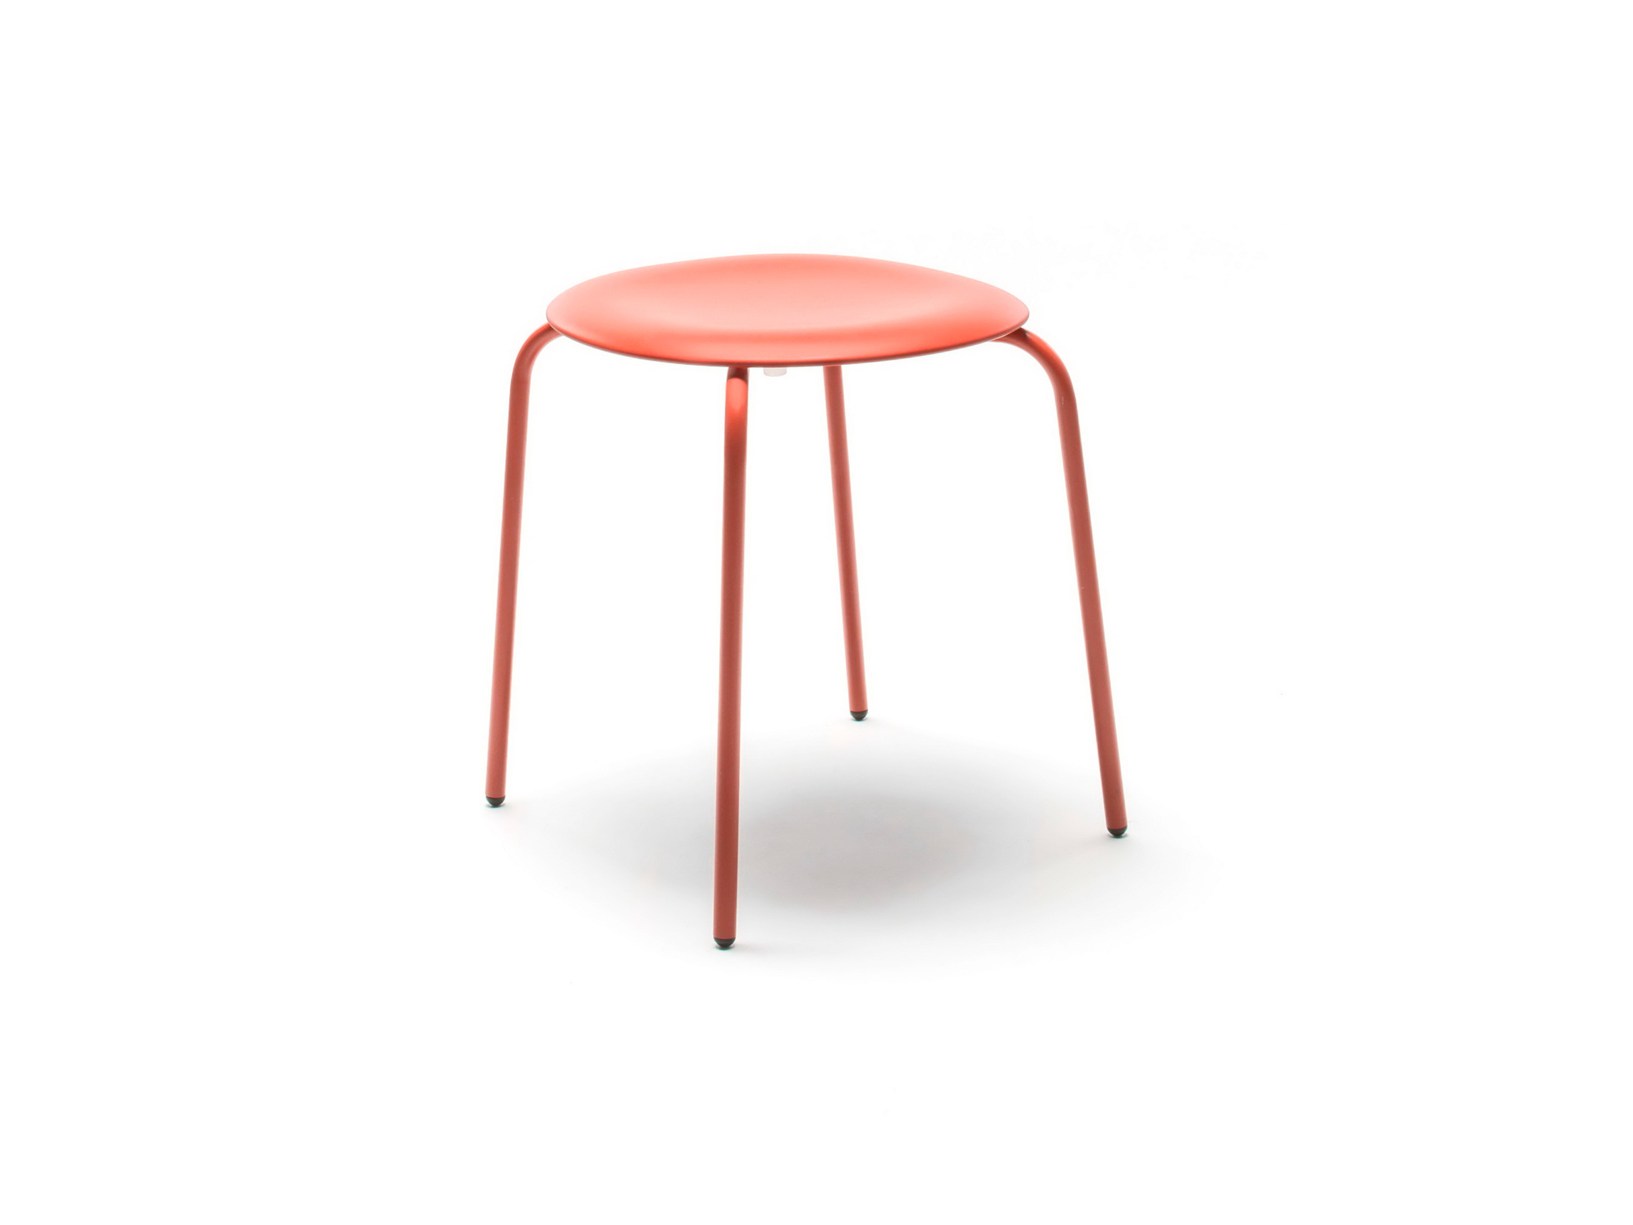 PRO STOOL Collection 2016 by Konstantin Grcic for Flötotto